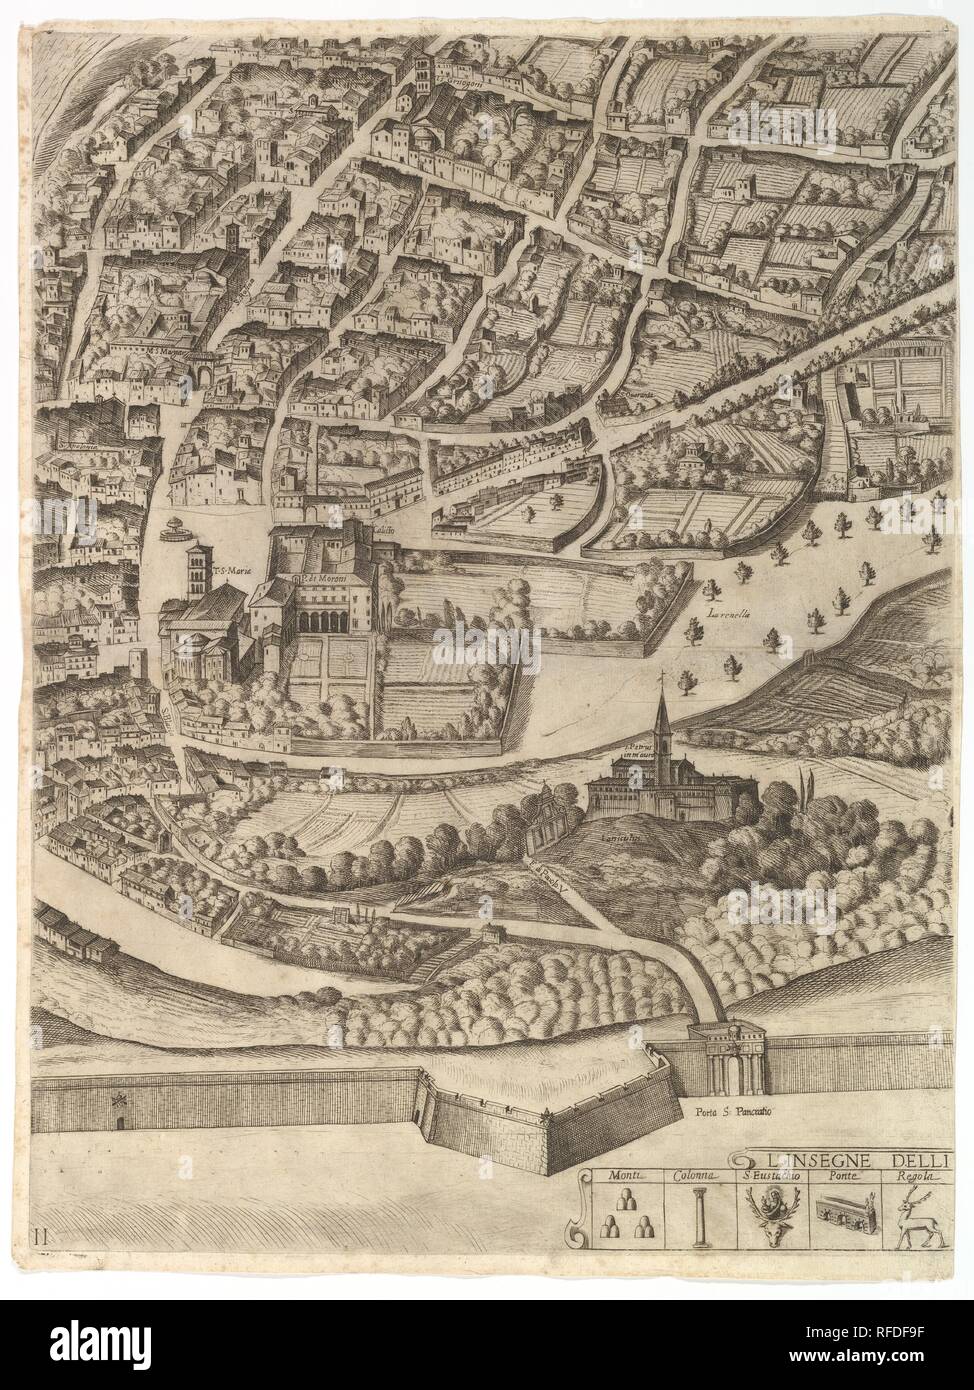 Plan of the City of Rome. Part 11 with the San Pancrazio (left bank). Artist: Antonio Tempesta (Italian, Florence 1555-1630 Rome). Dedicatee: Dedicated to Cardinal Camillo Pamphili. Dimensions: Sheet: 21 13/16 x 16 5/16 in. (55.4 x 41.5 cm)  Plate: 21 1/4 x 16 in. (53.9 x 40.6 cm). Publisher: Published by Giovanni Domenico de Rossi (Italian, 1619-1653). Date: 1645.  Part of the lower half of the map of Rome. Depicted is a southern part of the city with a view of both the left bank where the San Pancrazio can be identified. In the lower margin the symbols for the first five boroughs of Rome are Stock Photo